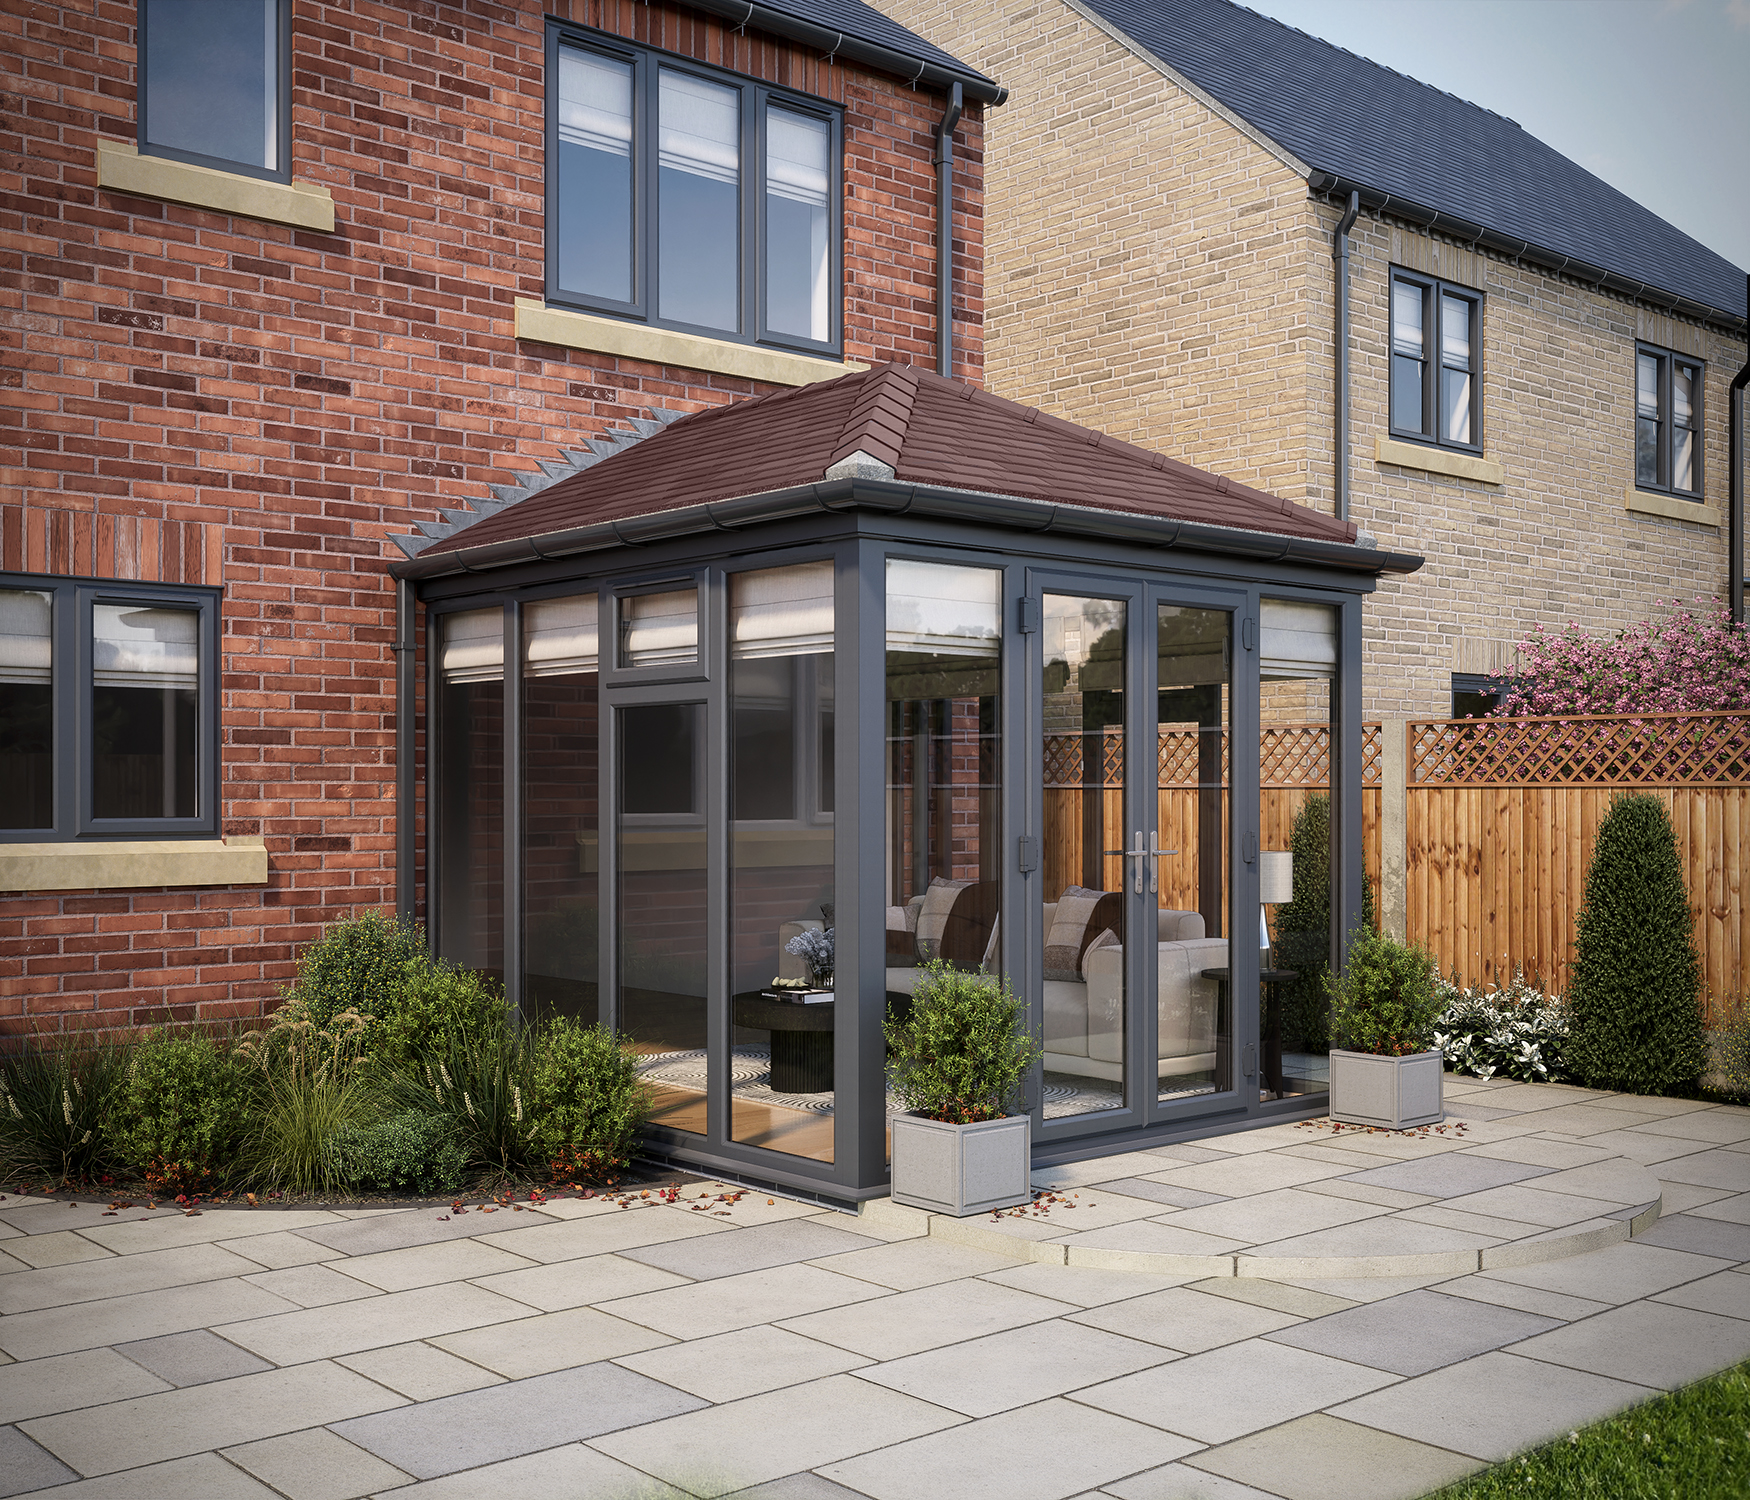 Image of SOLid Roof Full Height Edwardian Conservatory Grey Frames with Rustic Brown Tiles - 13 x 10ft